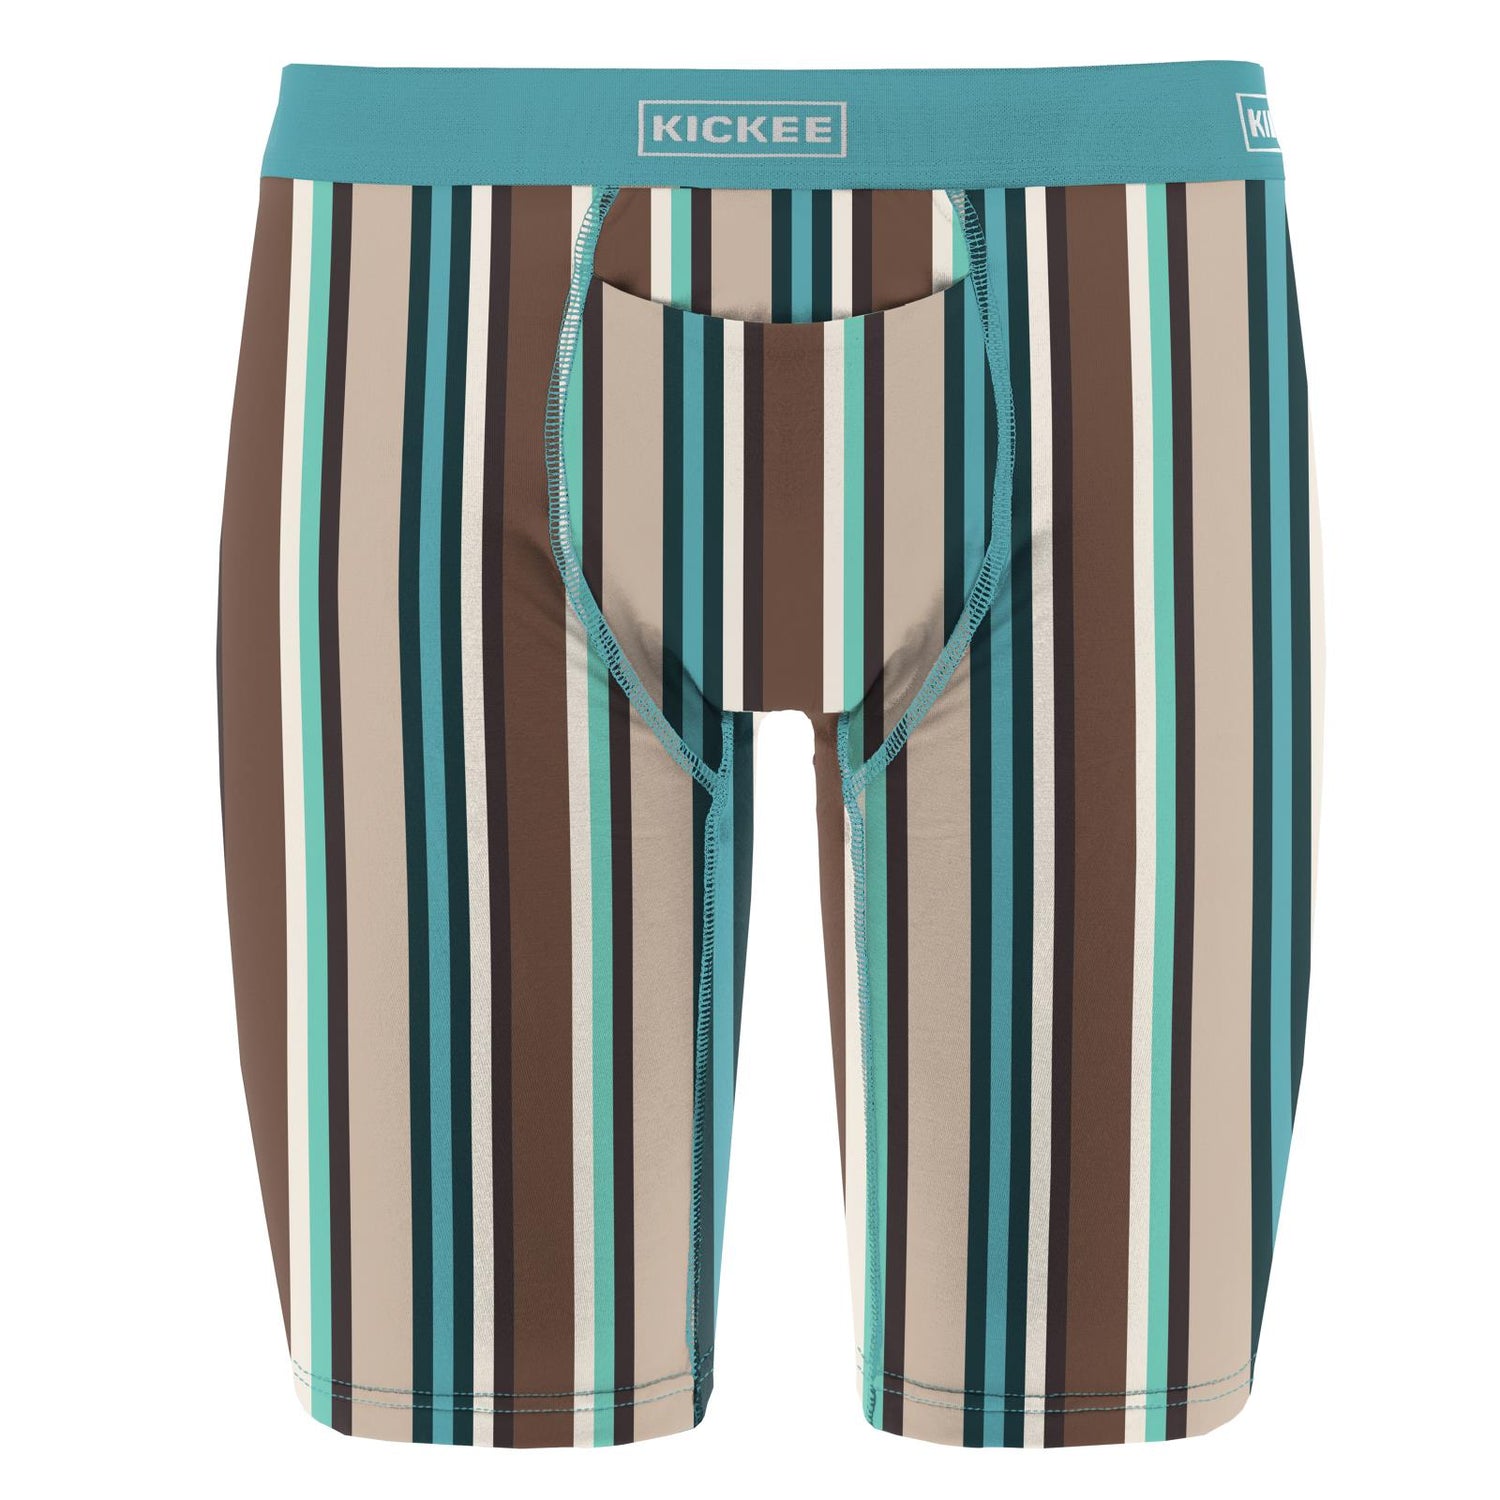 Men's Print Long Boxer Brief with Top Fly in Dad's Tie Stripe